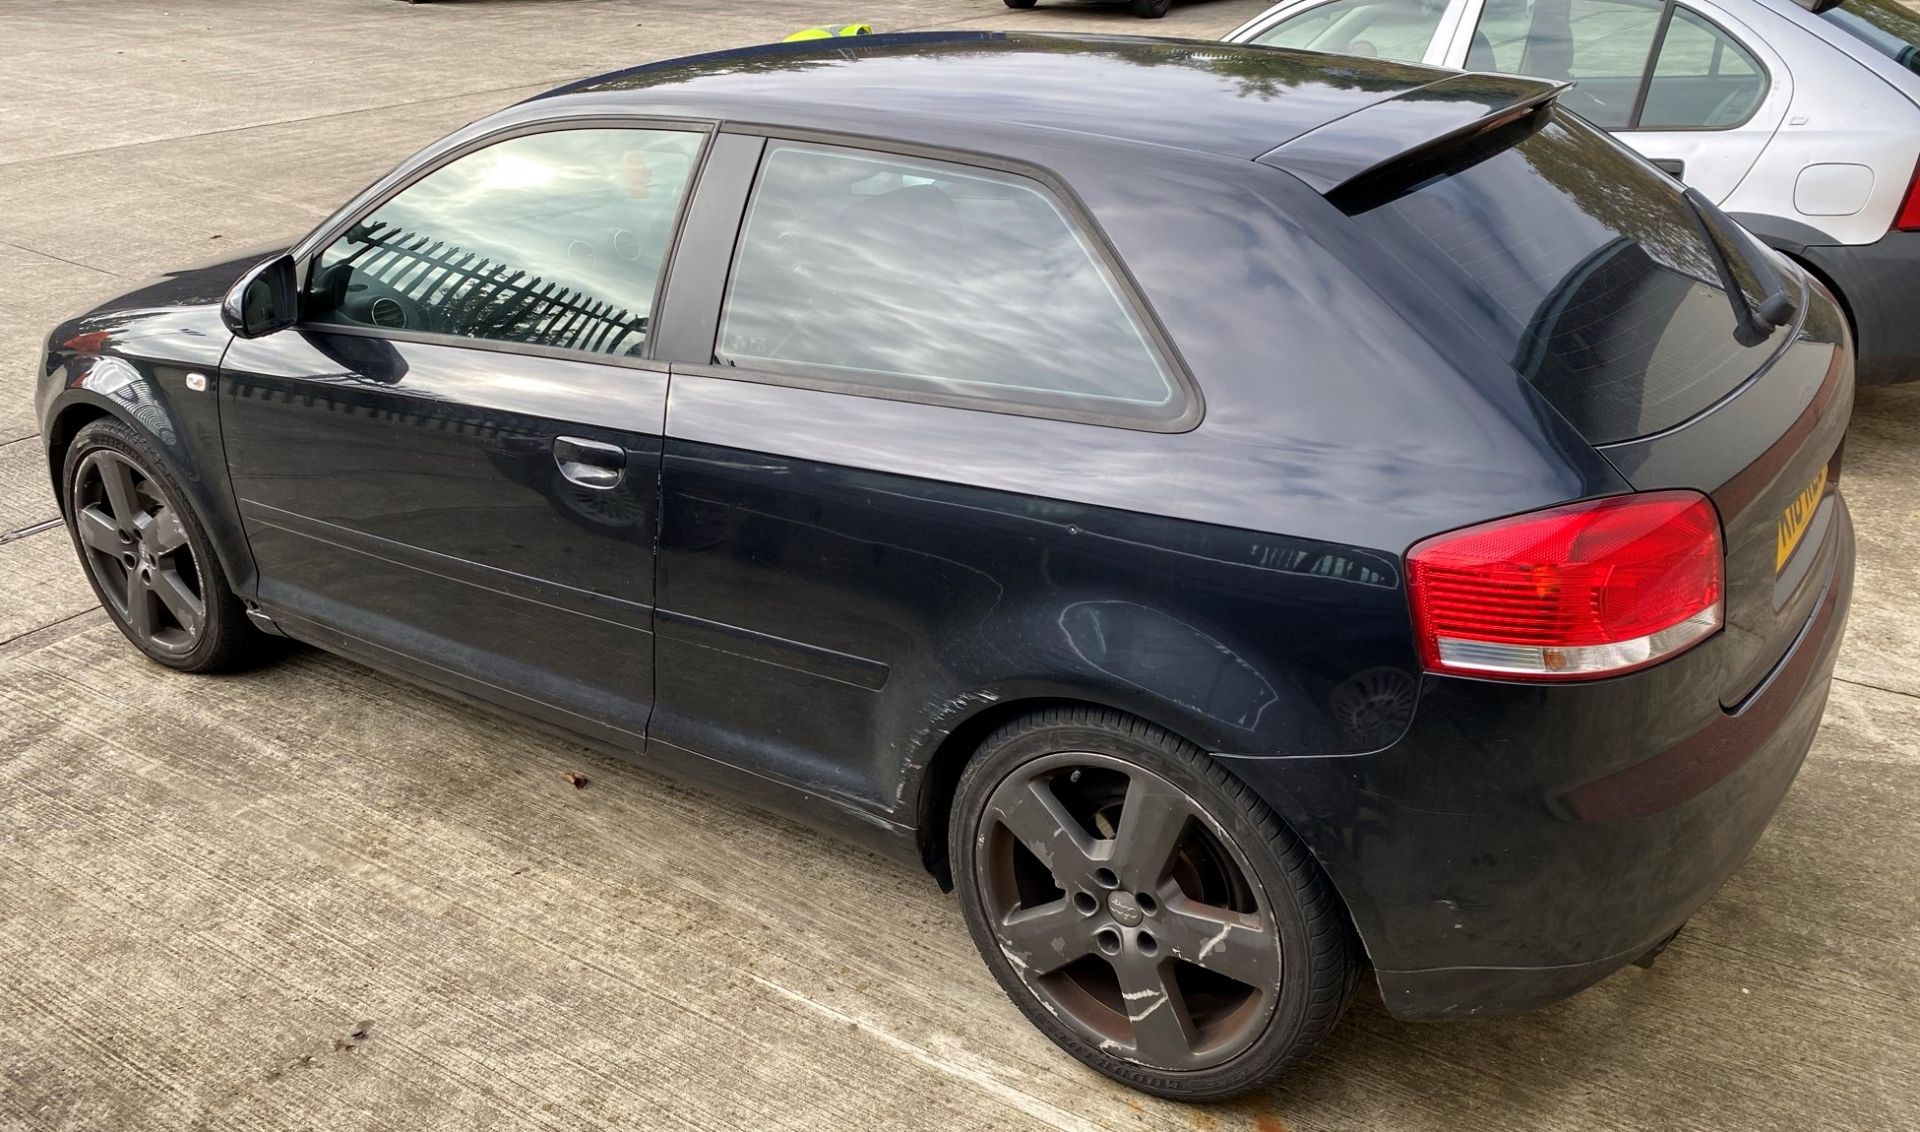 SEIZED VEHICLE: AUDI A3 S LINE 3 DOOR COUPE - diesel - black - black leather interior Reg No: Not - Image 6 of 9